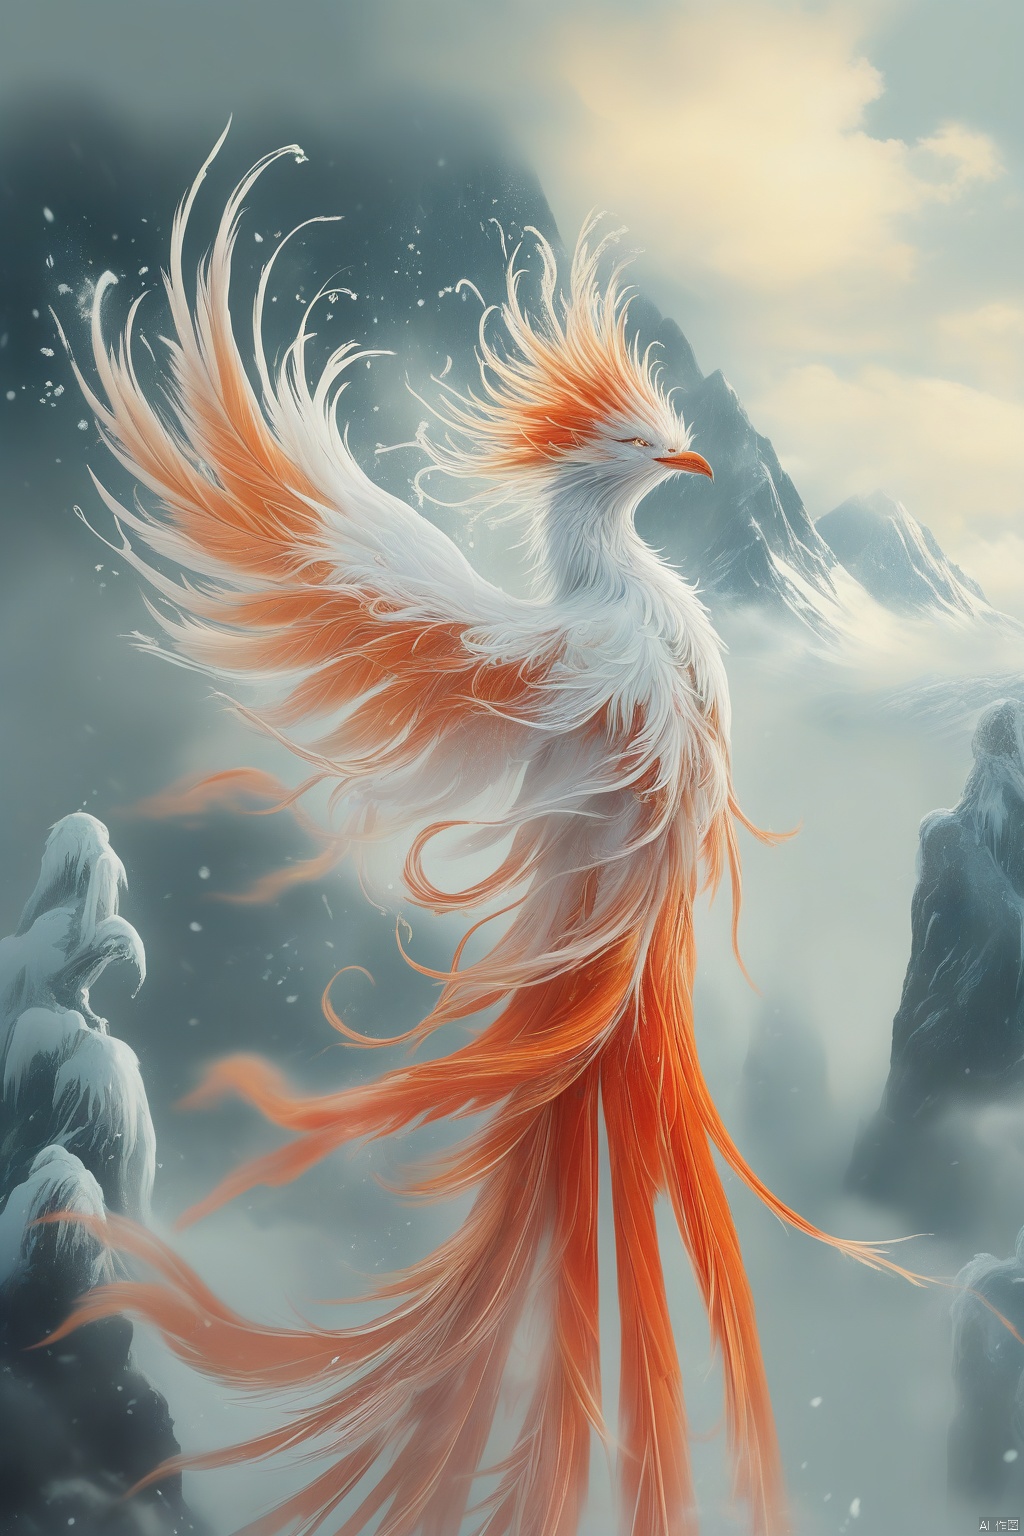 A phoenix formed by ice water, with slender tail feathers fluttering in the wind. Mist covers part of the phoenix's body, and the background is a snowy mountain